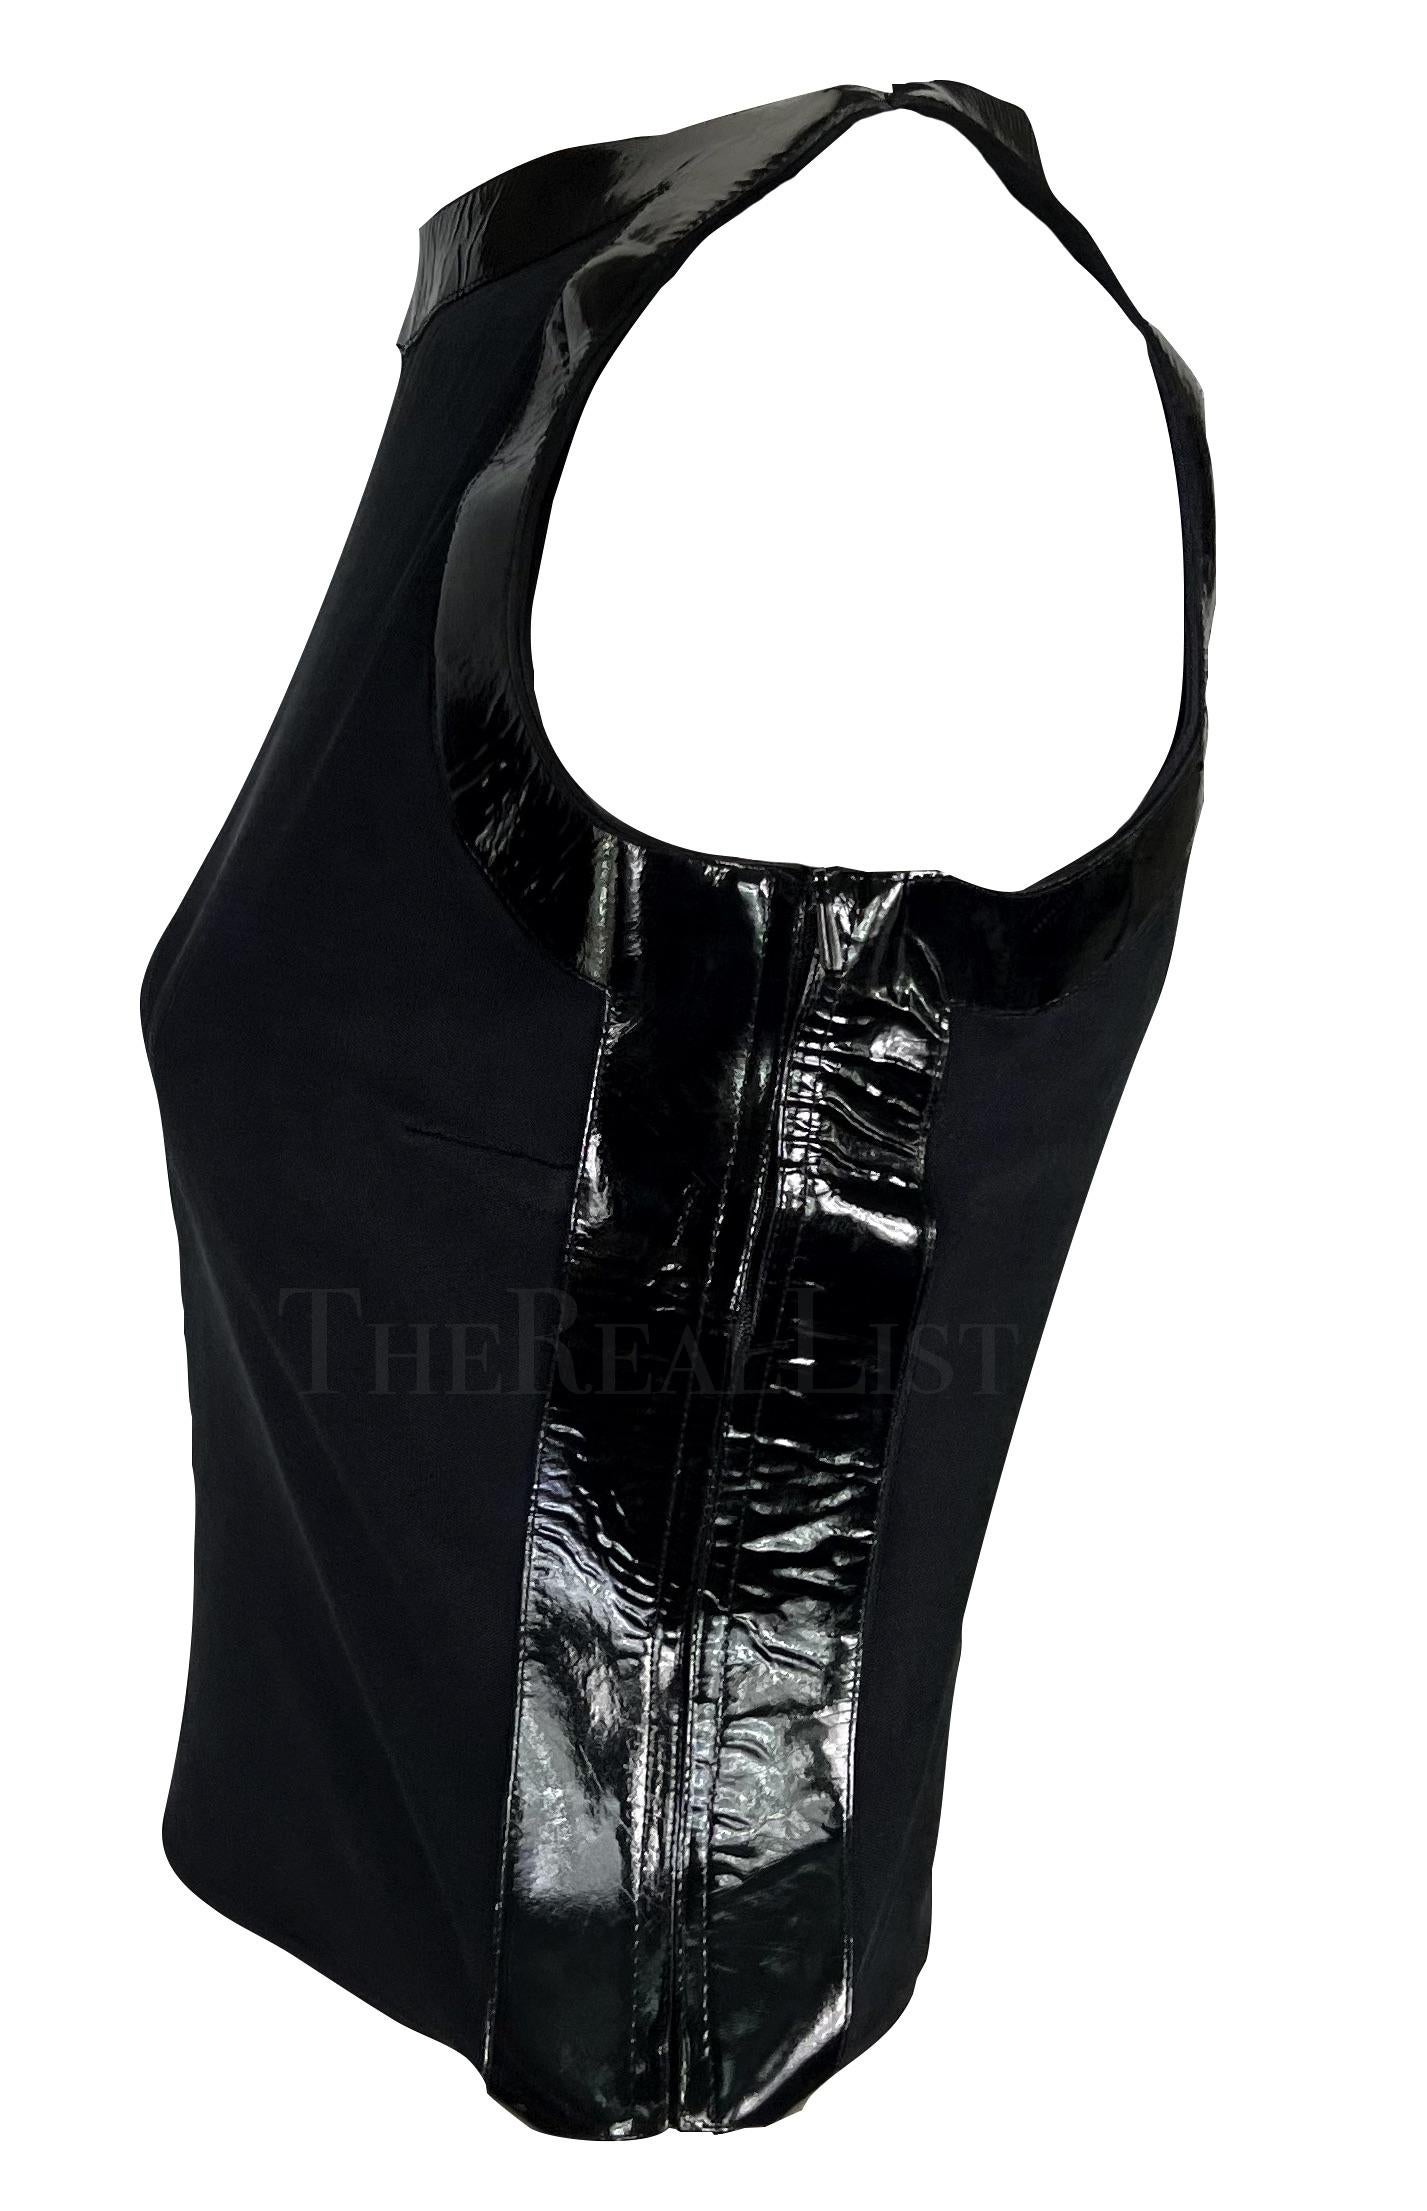 Presenting a black Gucci crop top, designed by Tom Ford. From the Spring/Summer 1999 collection, this semi-sheer top features a high boat-style neckline and is amped up with black patent leather accents on either side, around the arm holes, and